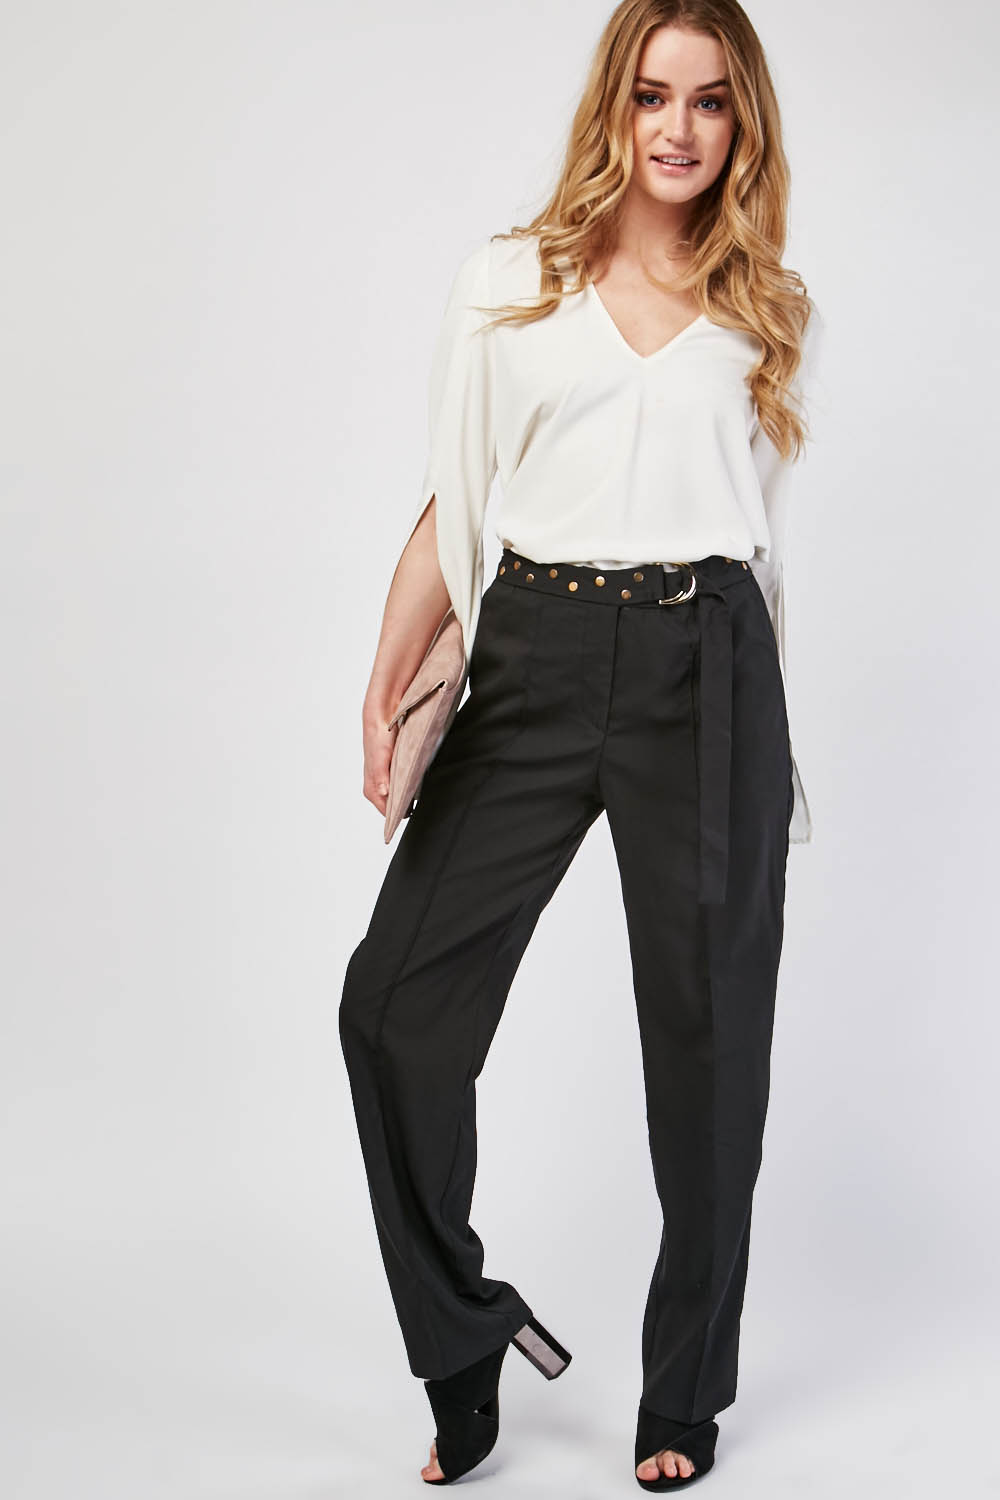 Studded D-Ring Belt Trousers - Just $7